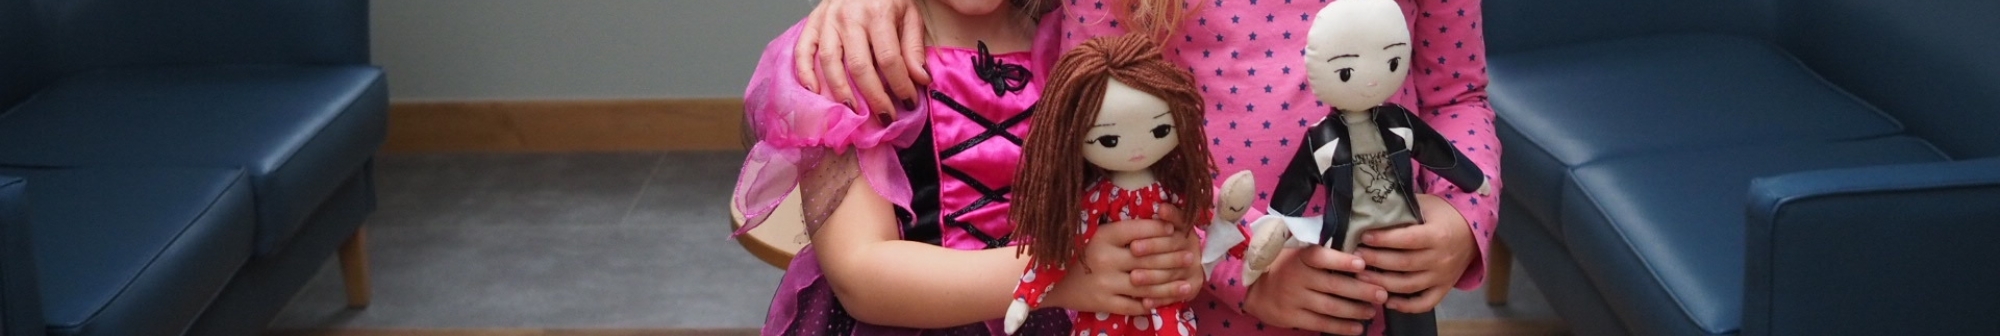 two-young-girls-hold-their-therapy-dolls